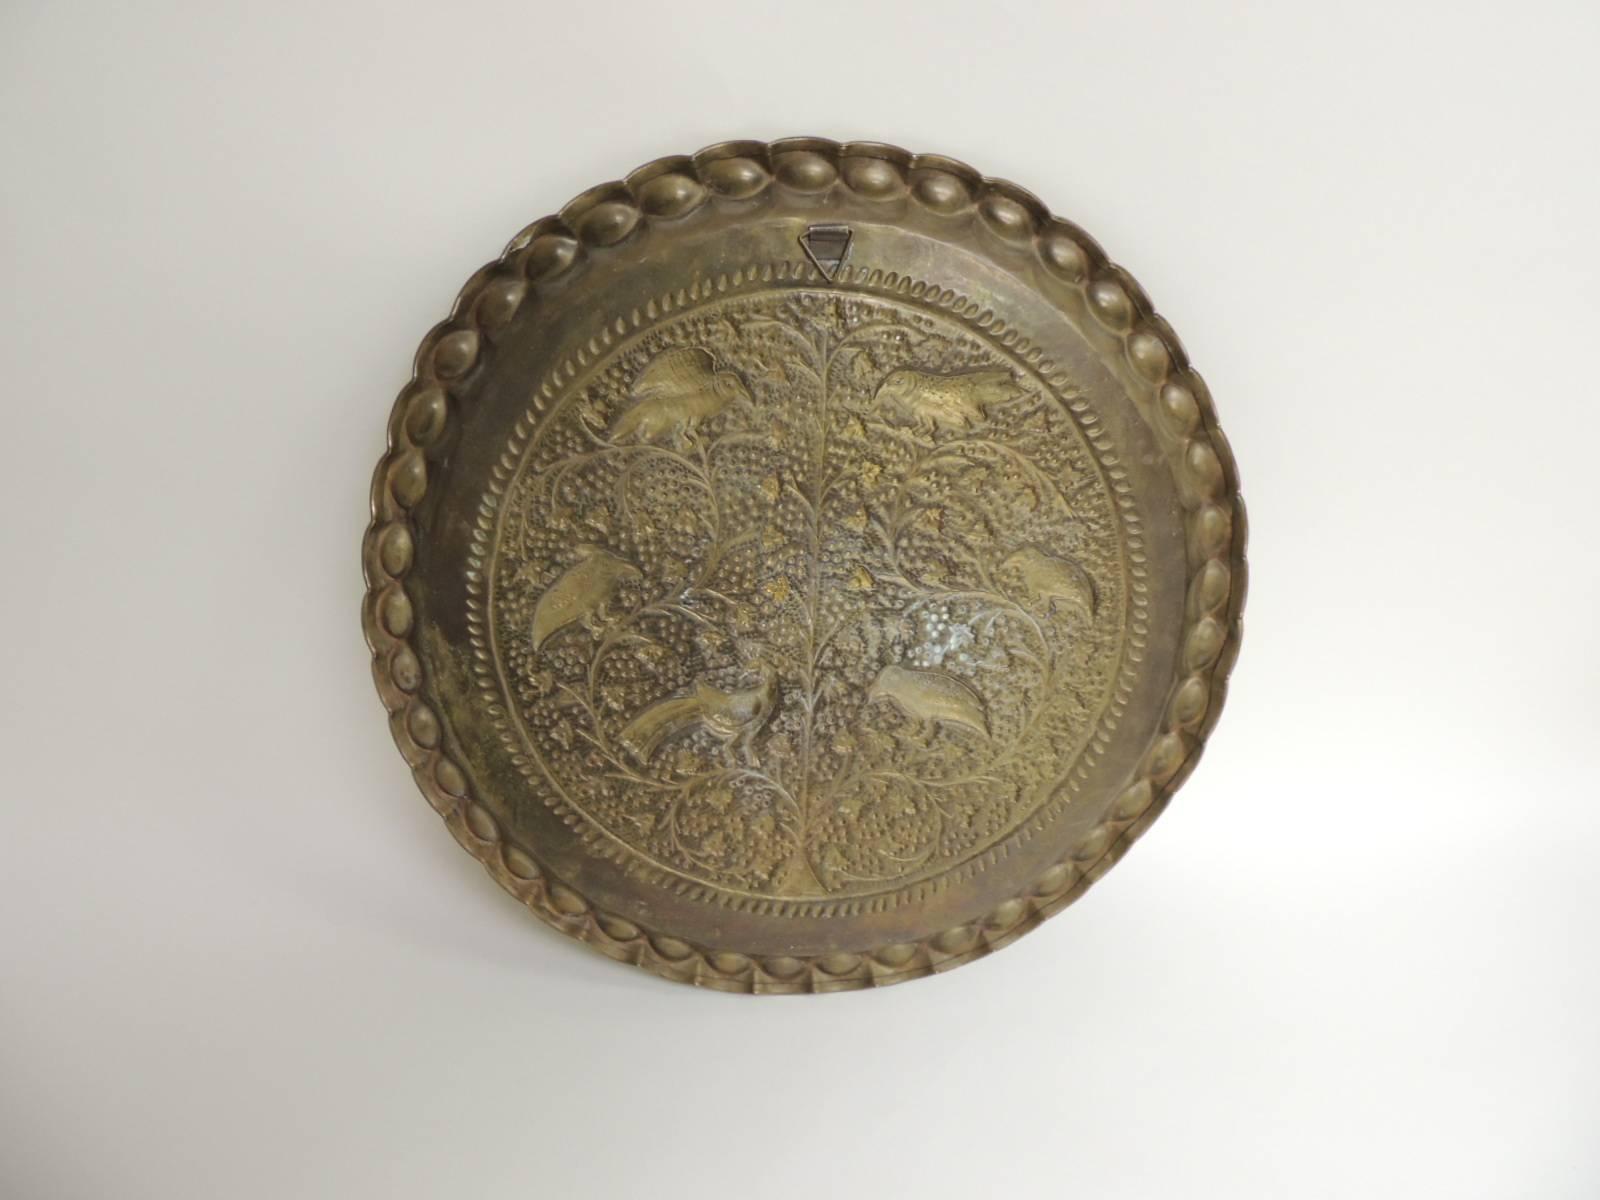 Syrian Vintage Persian Round Serving Tray